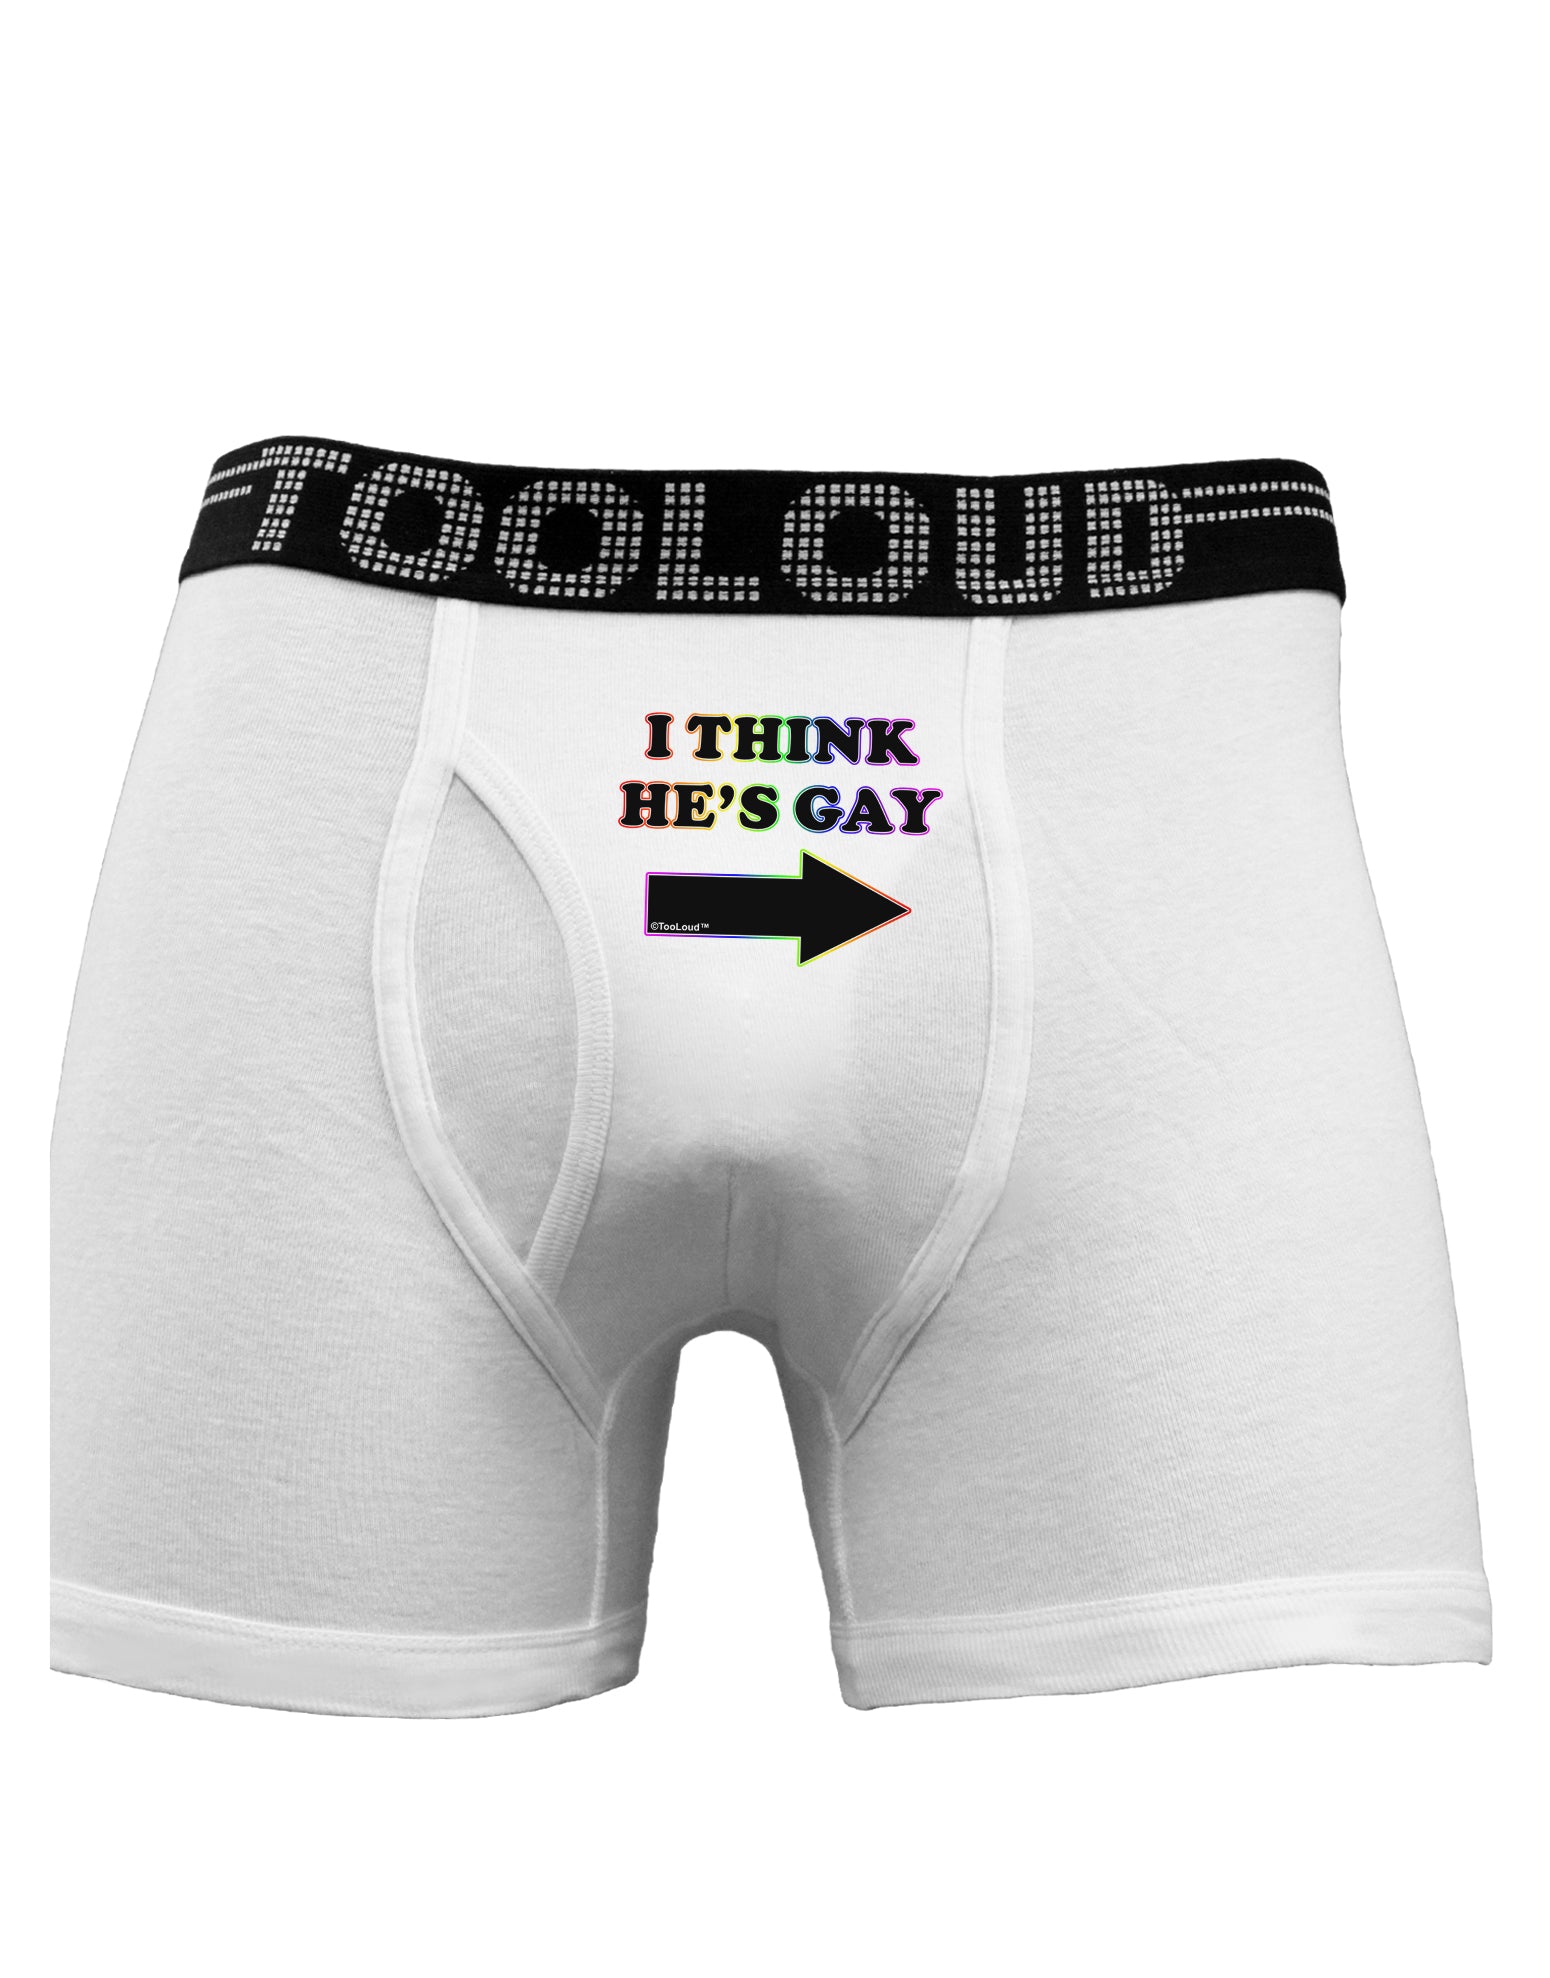 I Think He's Gay Right Boxer Briefs by TooLoud